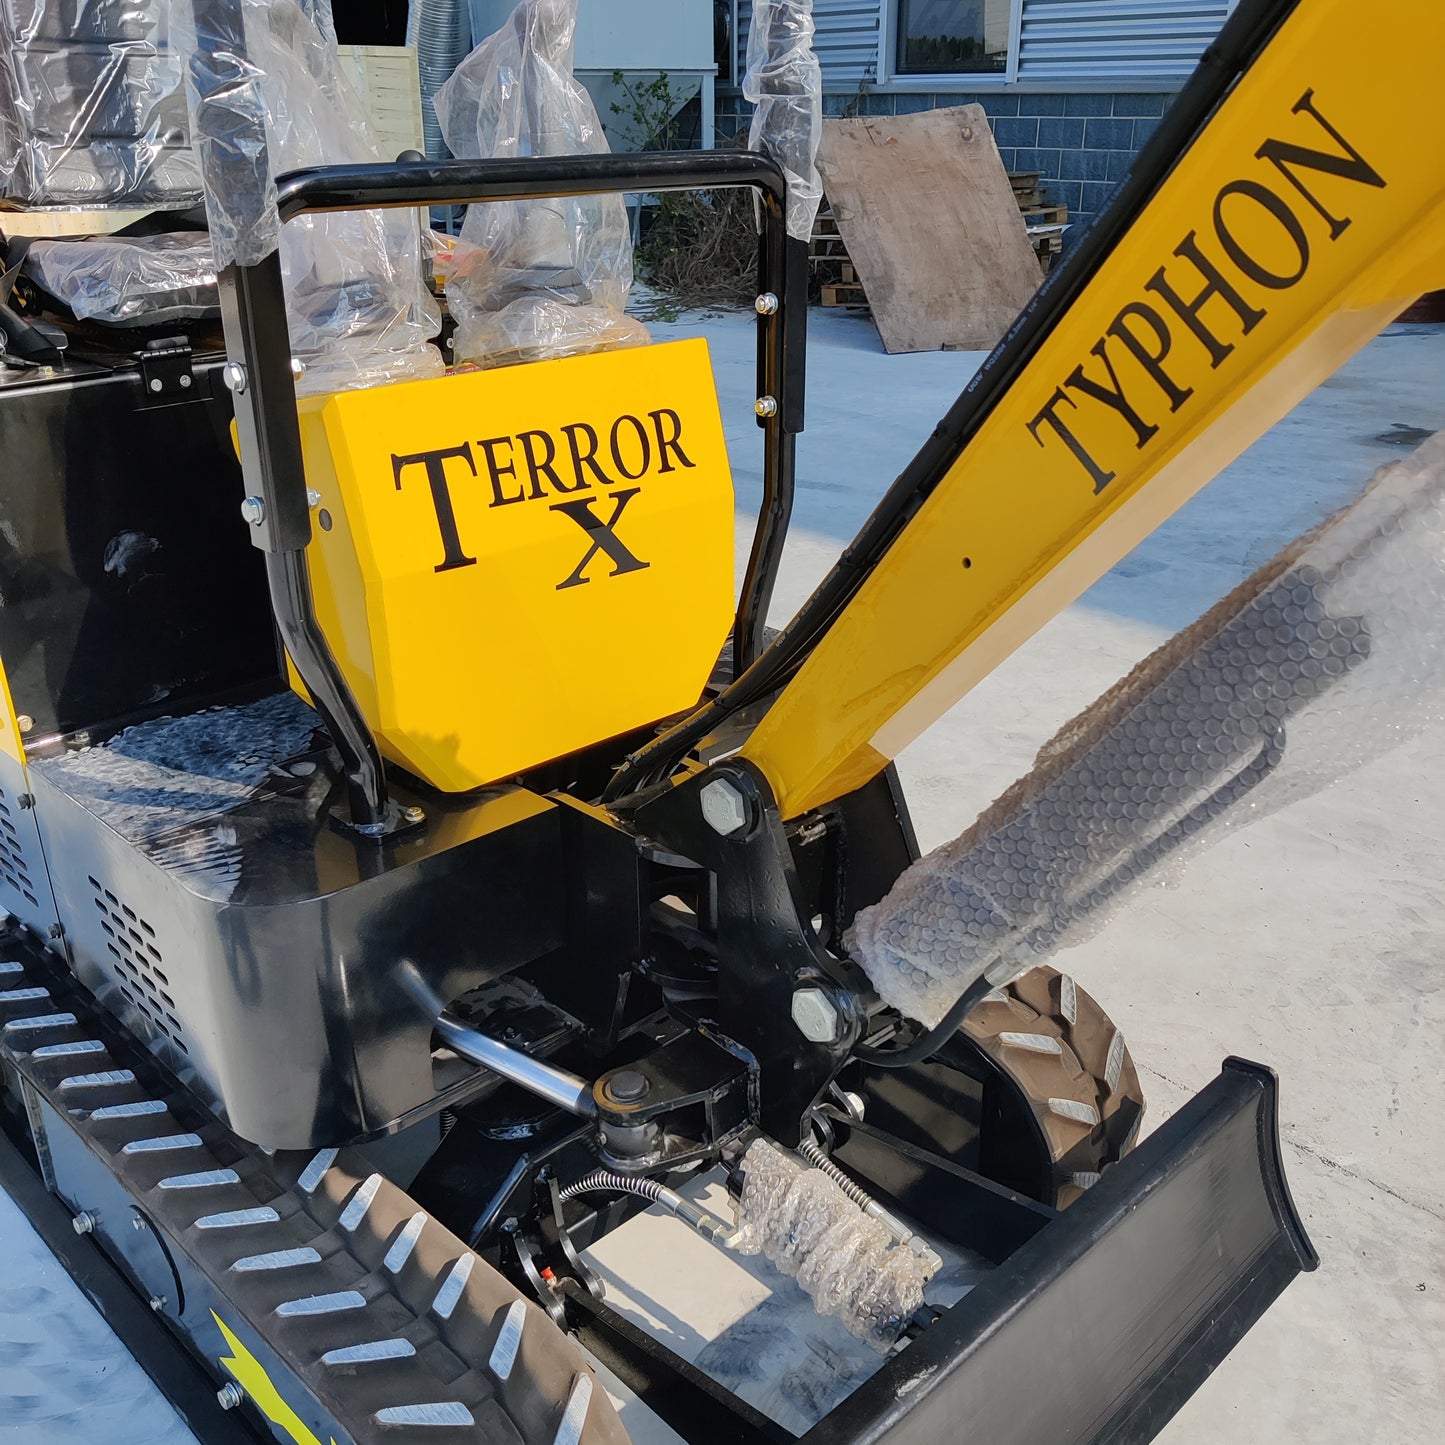 TYPHON TERROR X STORM Mini Excavator – 1 Ton Trench Digger with Canopy, 380mm Wide Bucket